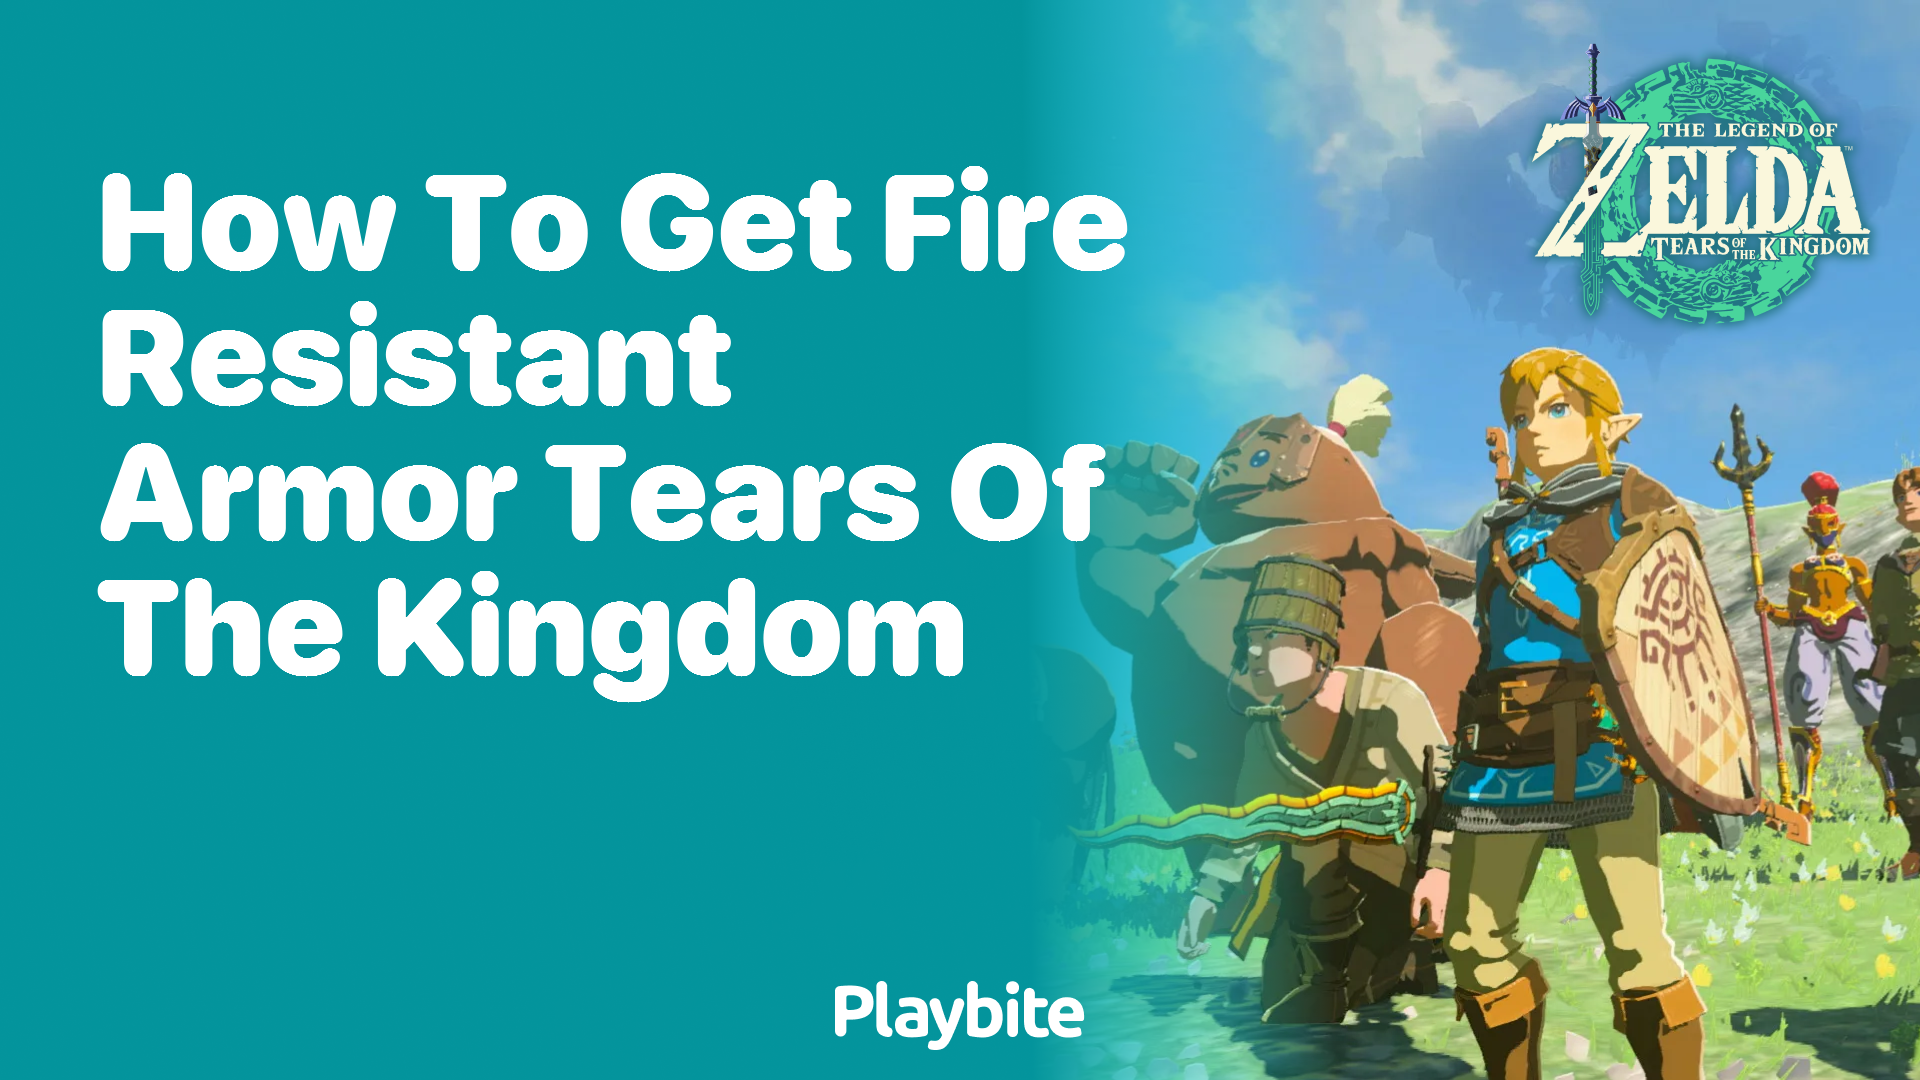 How to Get Fire Resistant Armor in Tears of the Kingdom